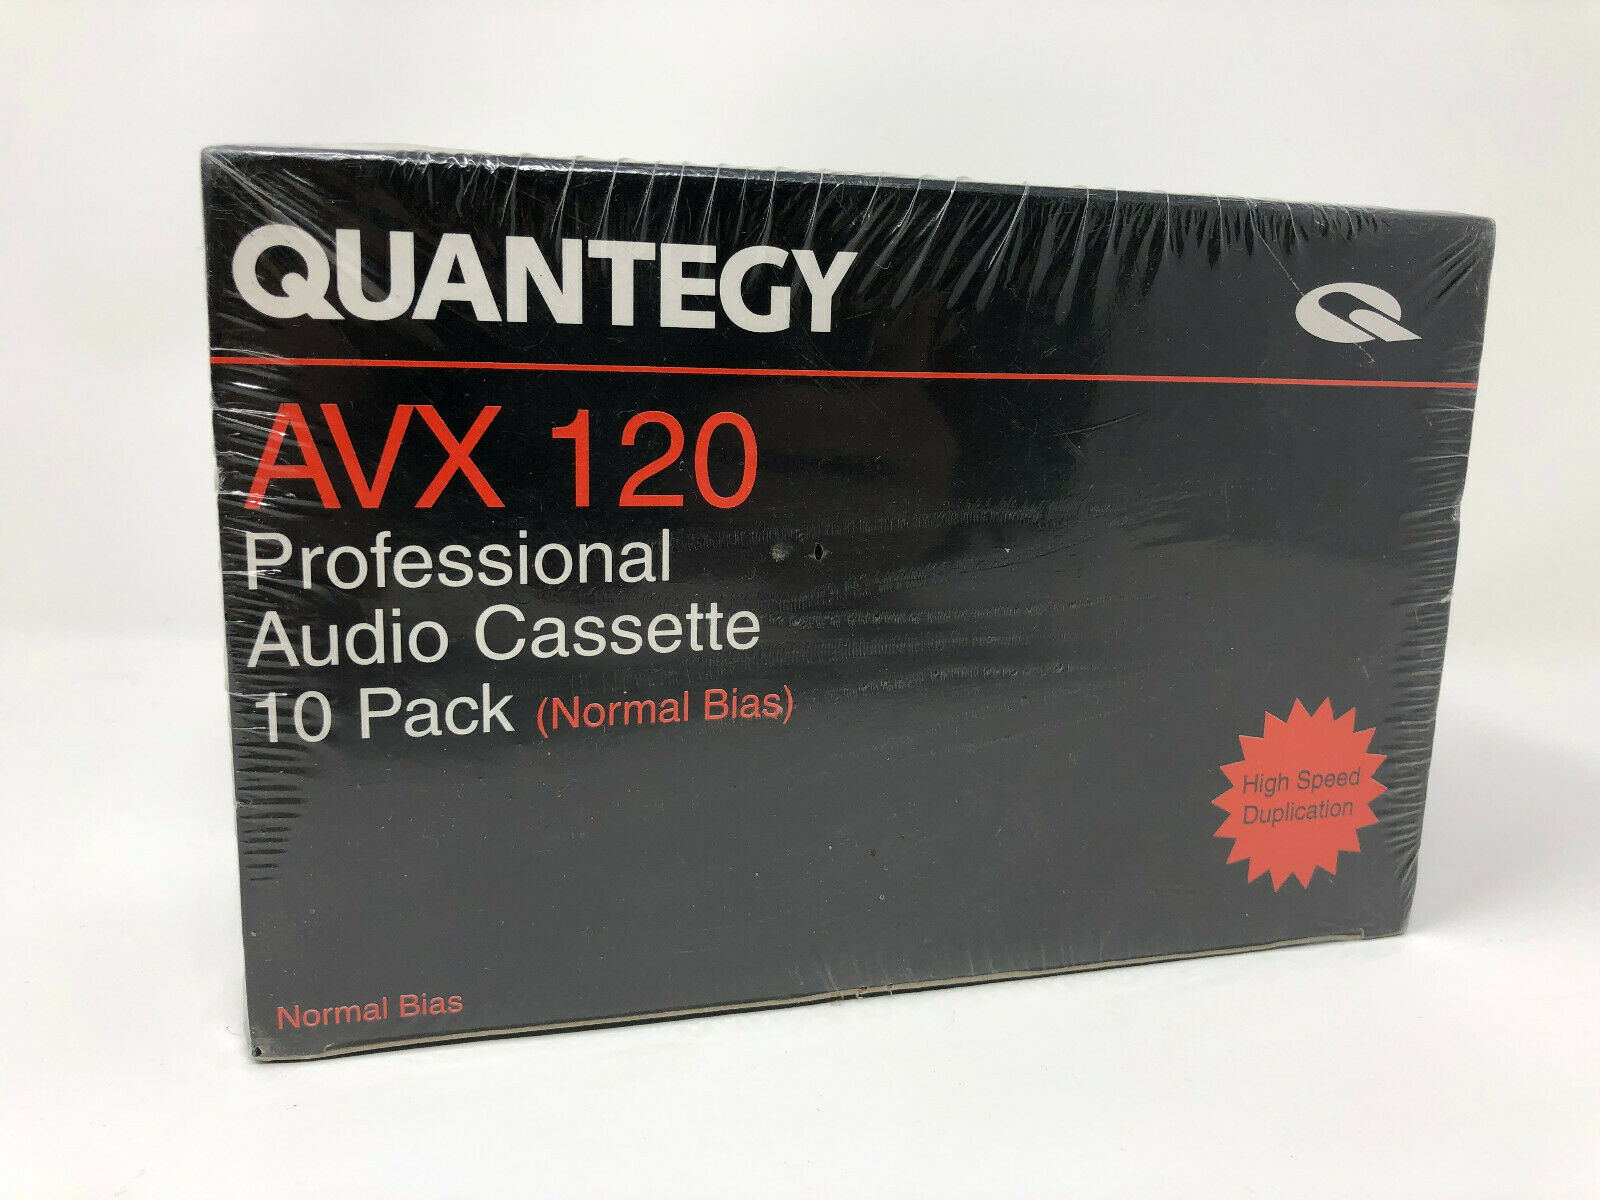 Quantegy Avx 120 Professional Audio Cassette Tape Tapes 10 Pack Brand New Sealed